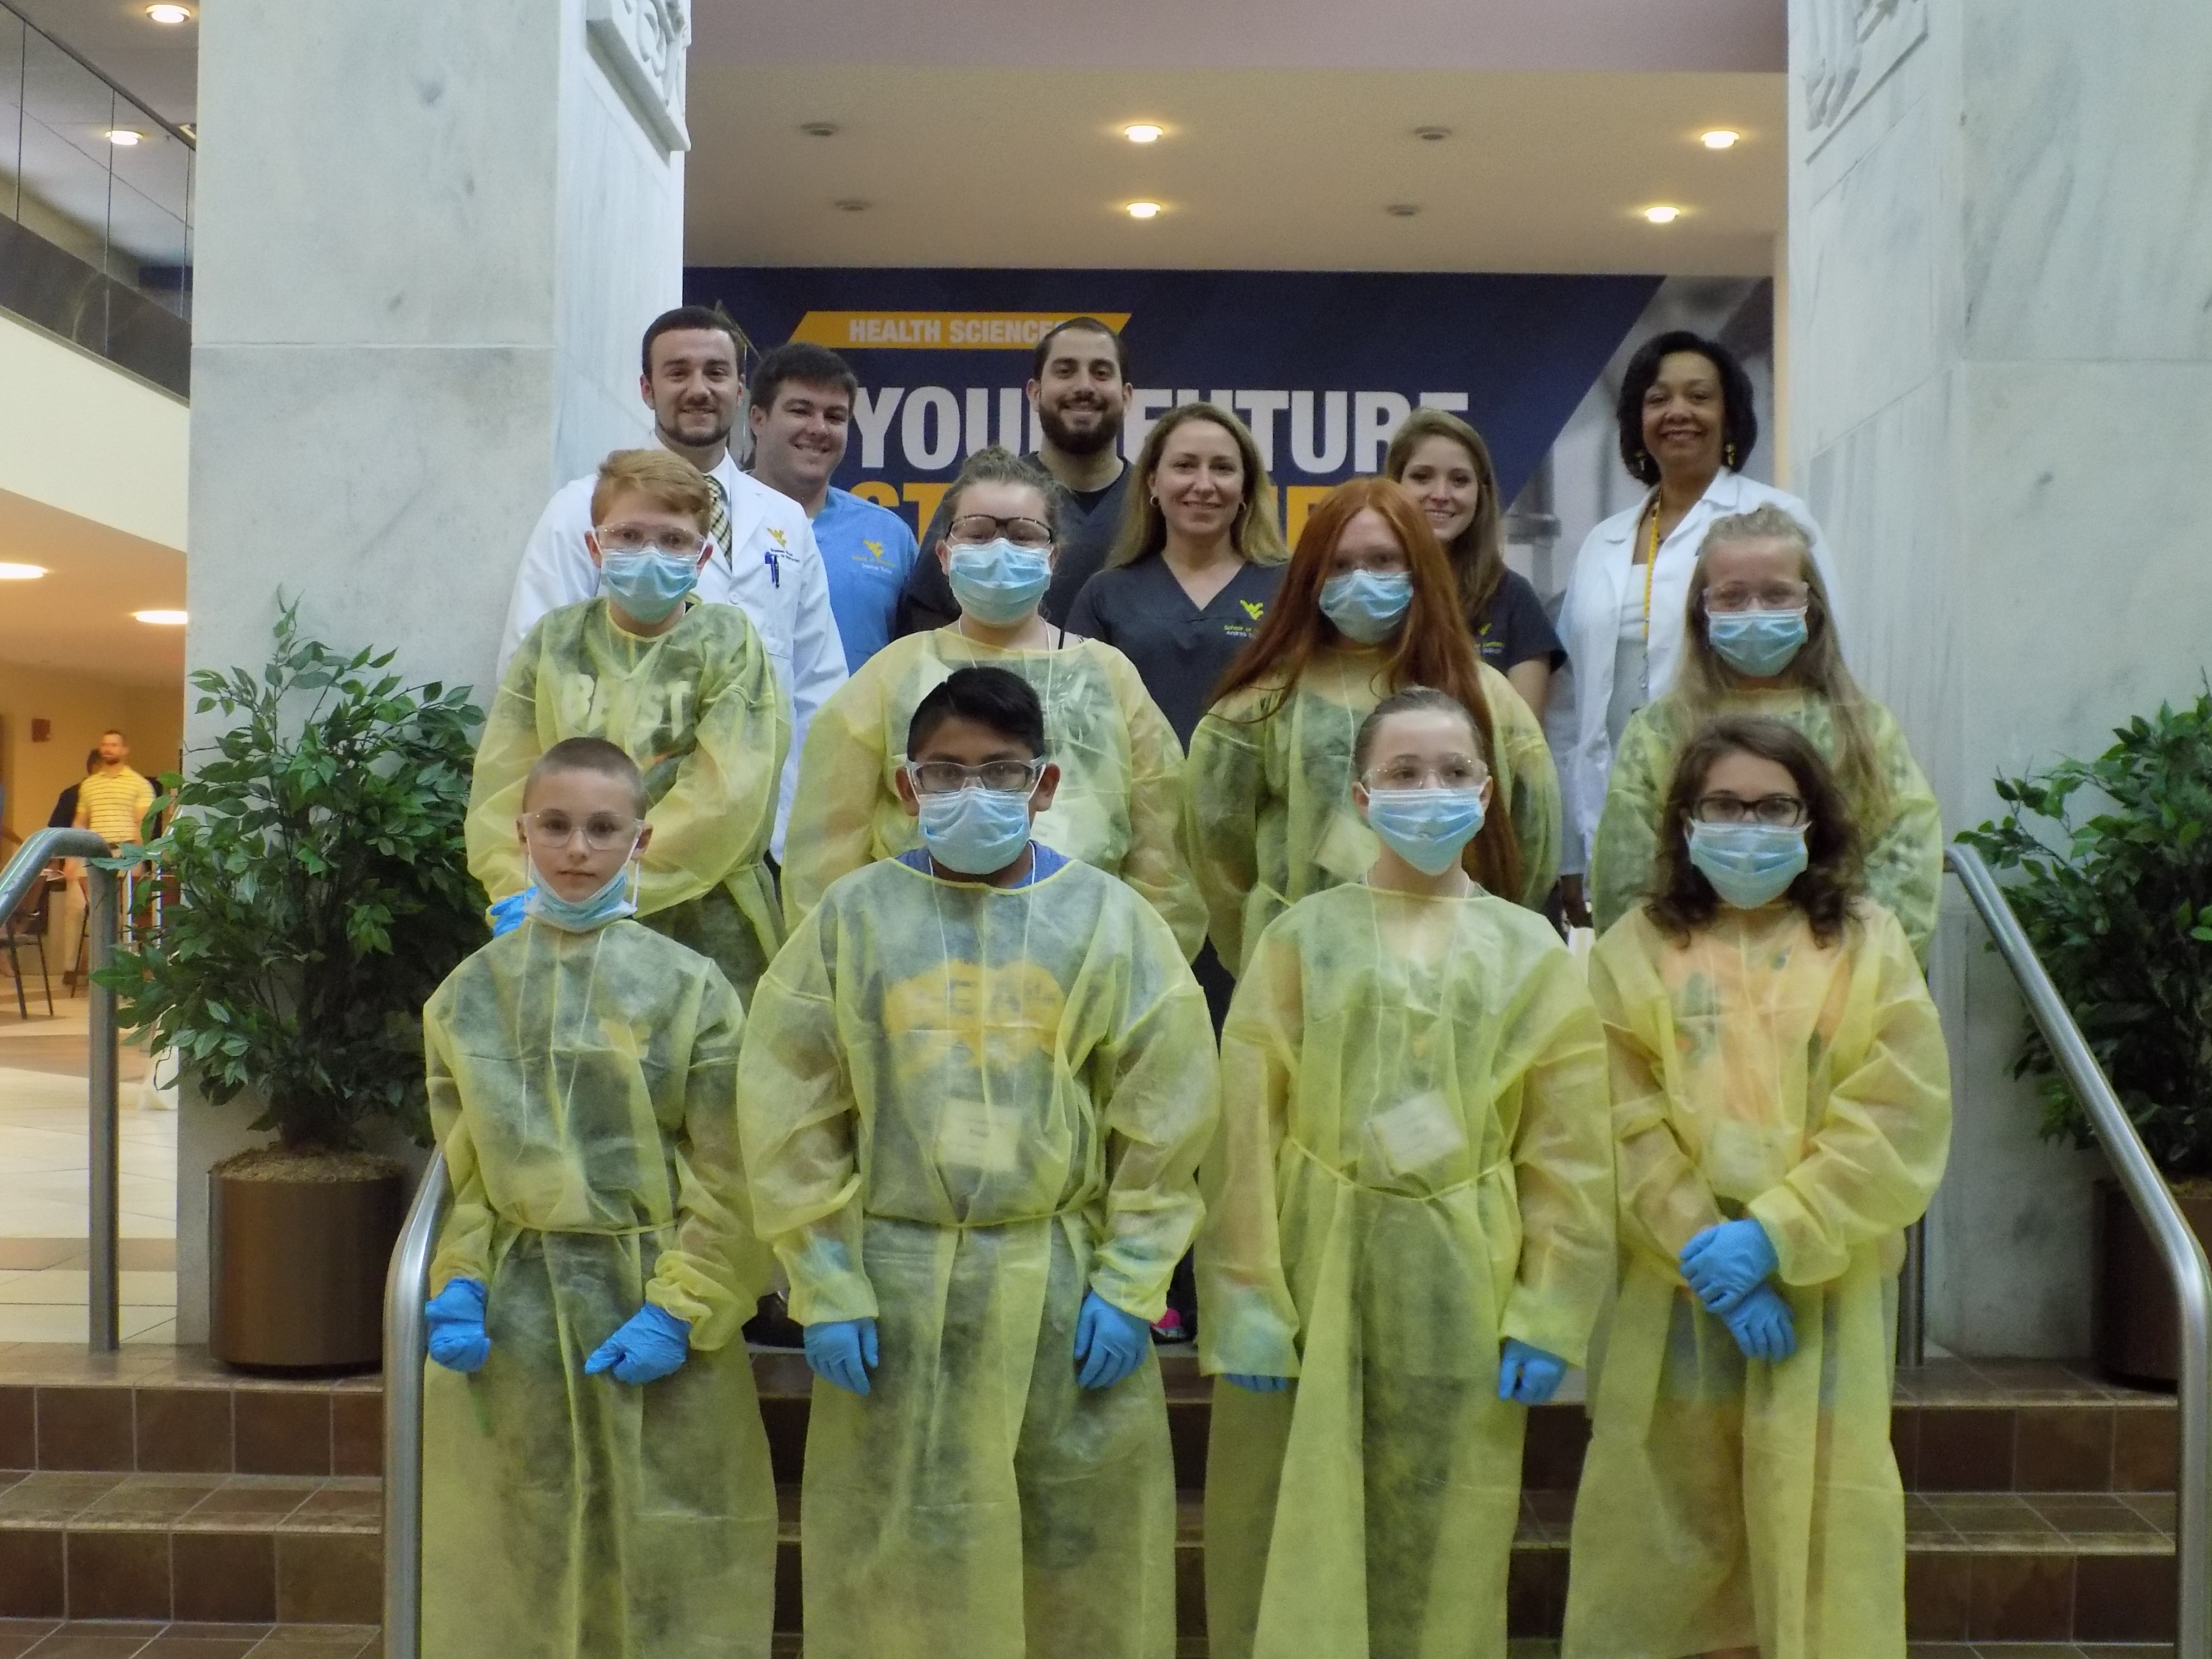 Brush with Dentistry participants pose with students and faculty wearing protective gowns, gloves and masks.